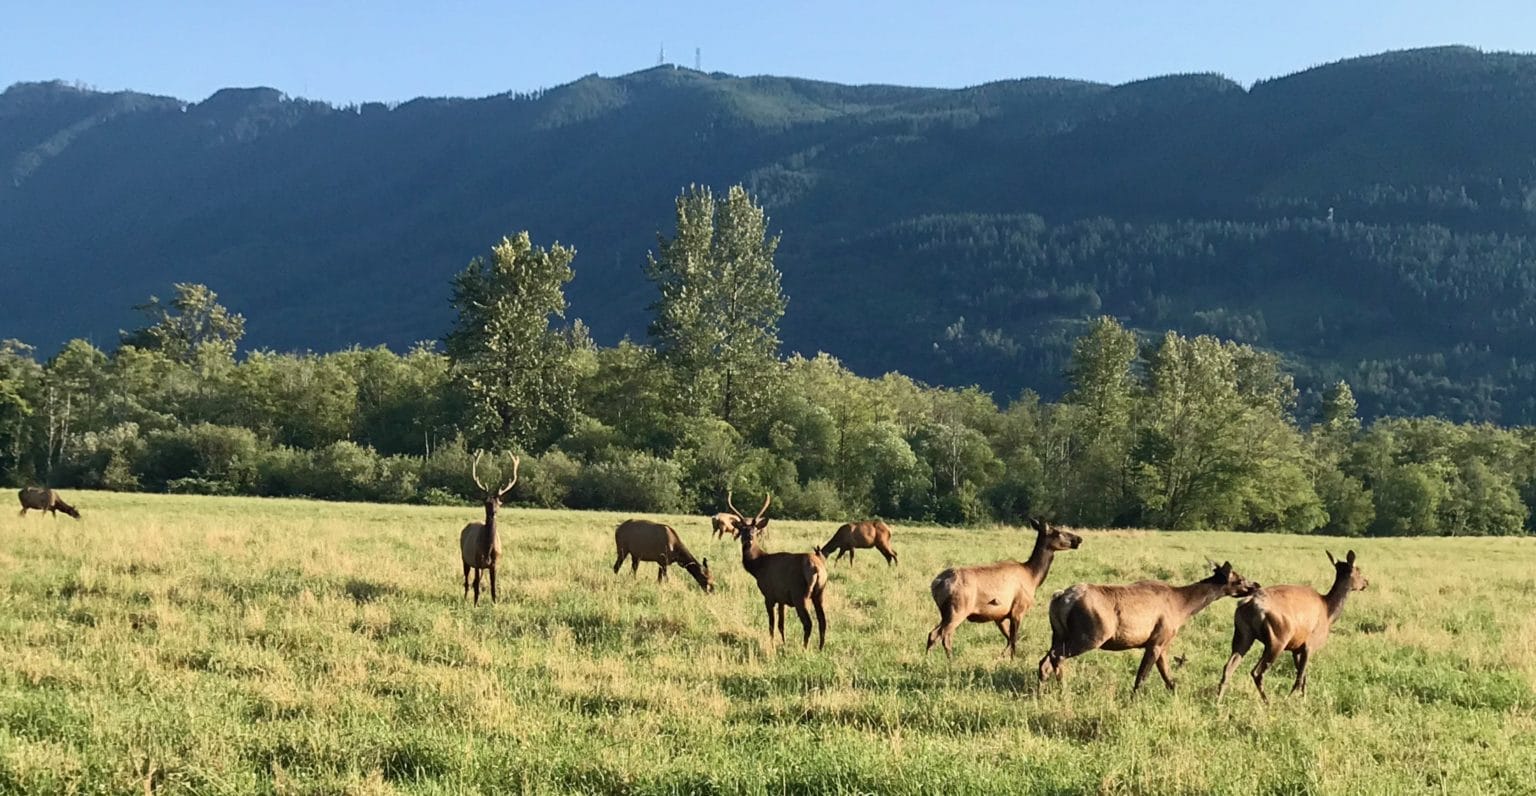 How History Lost and Saved Snoqualmie Valley’s Elk